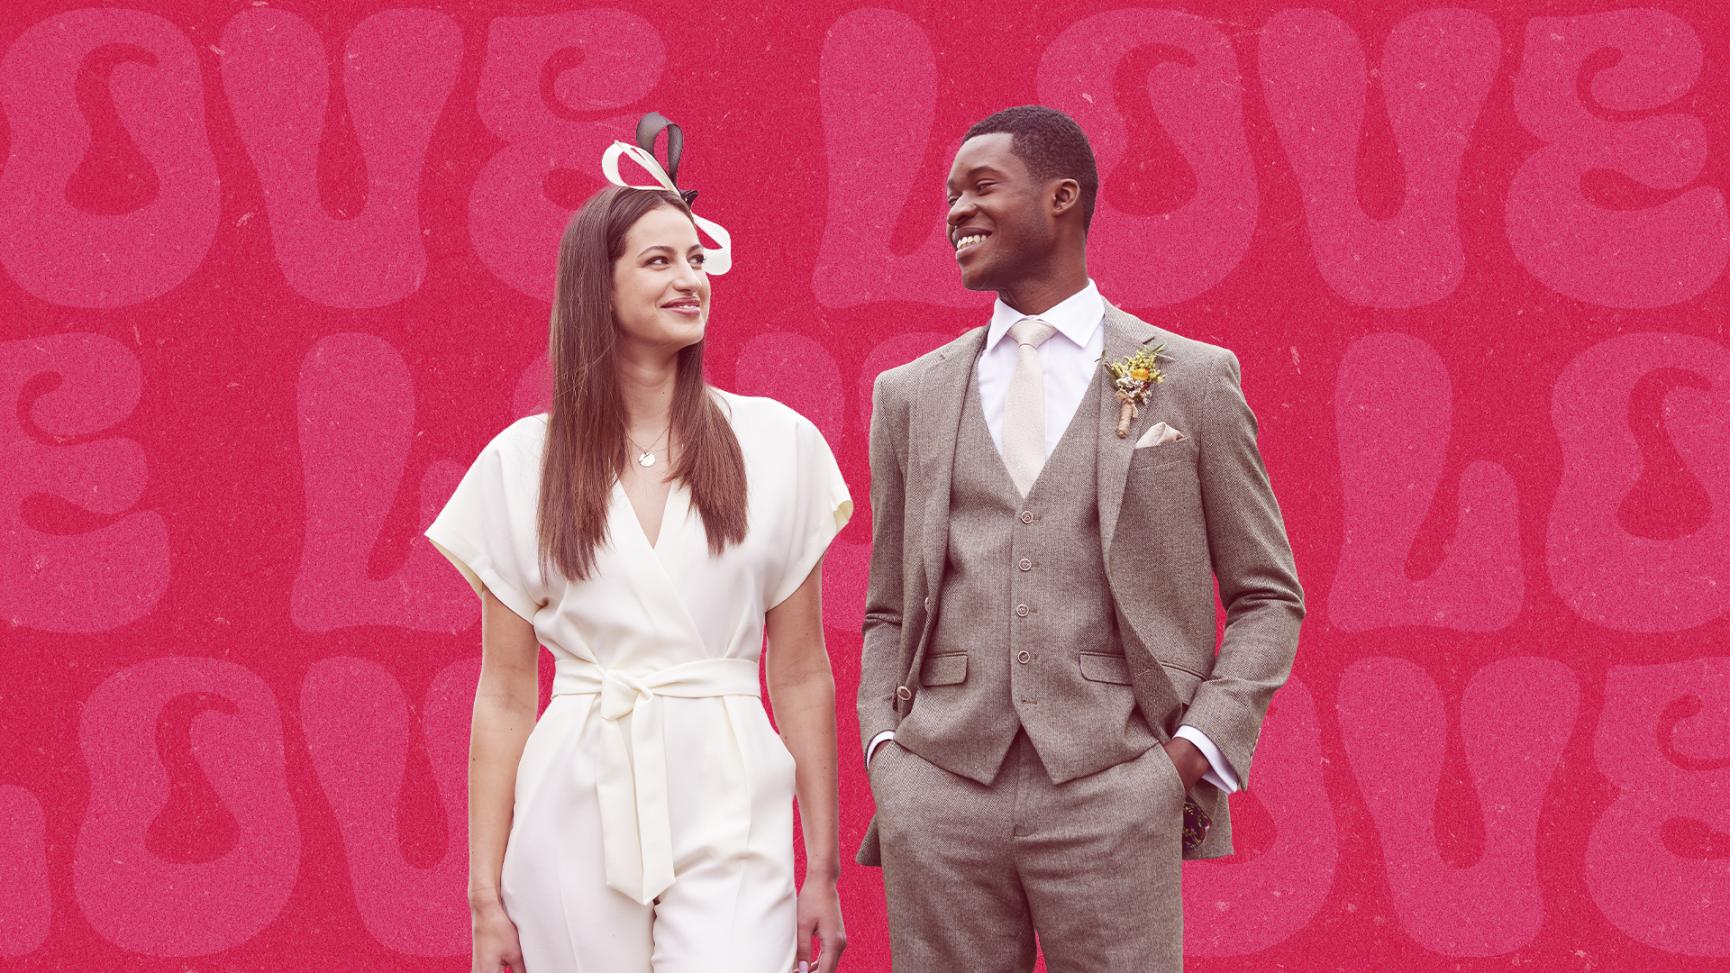 Find A Suit That Speaks Your Love Language This Valentine’s Day